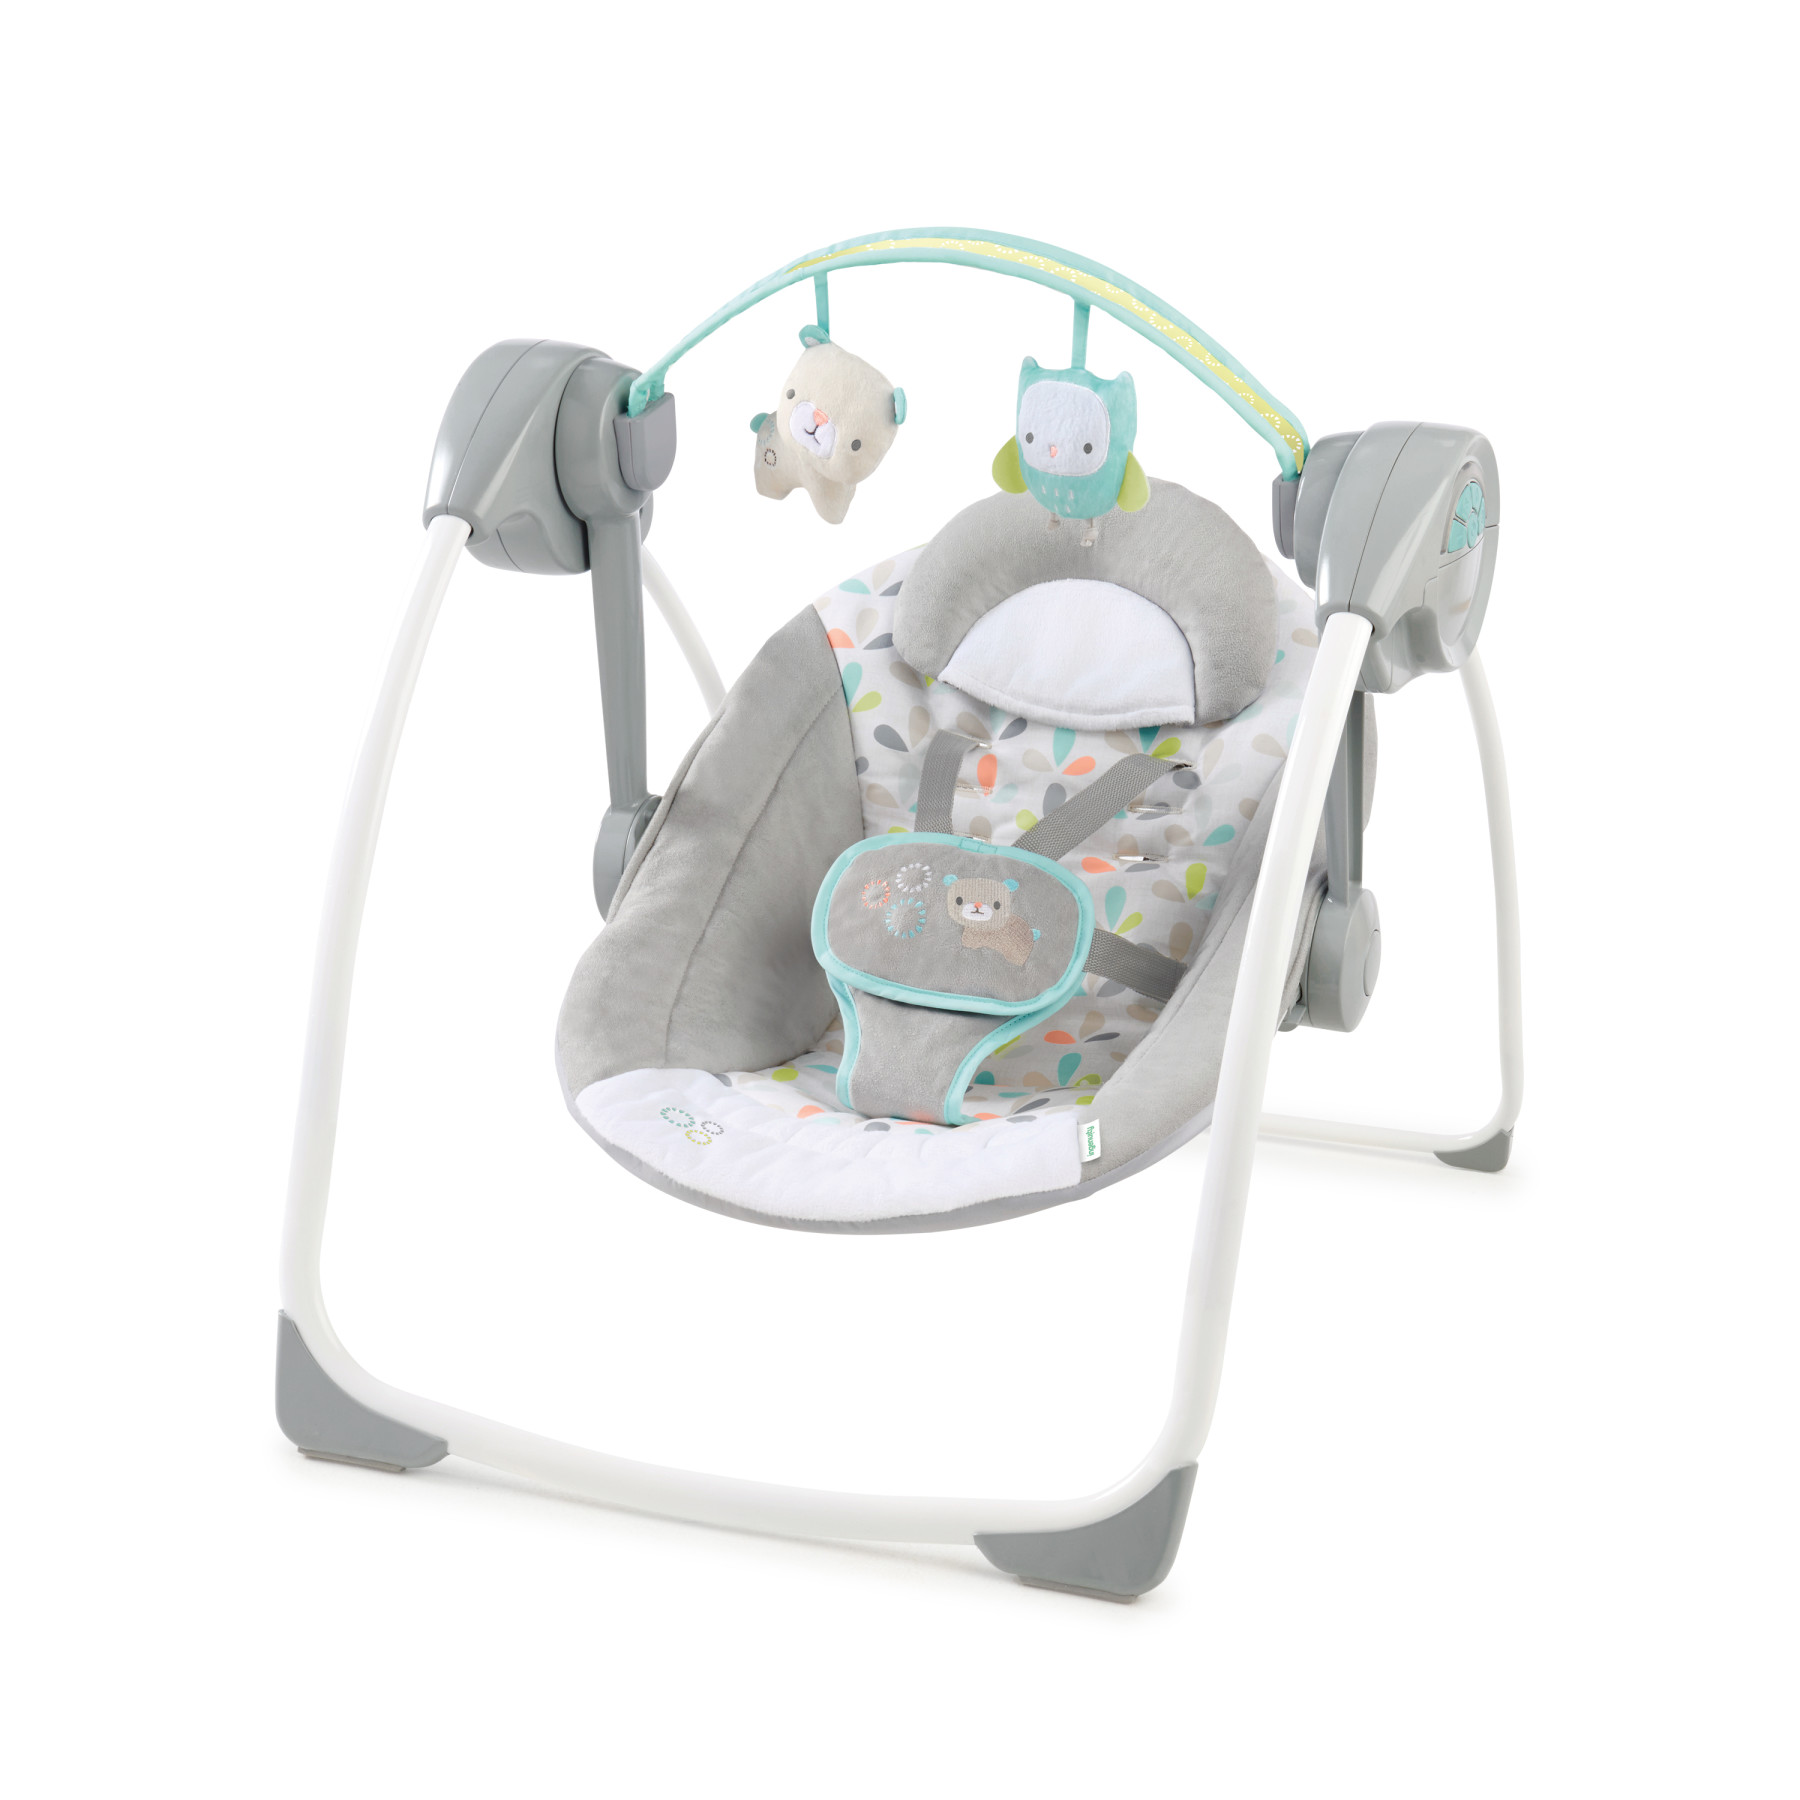 Bright Starts Bouncer Whimsical Wild Musical